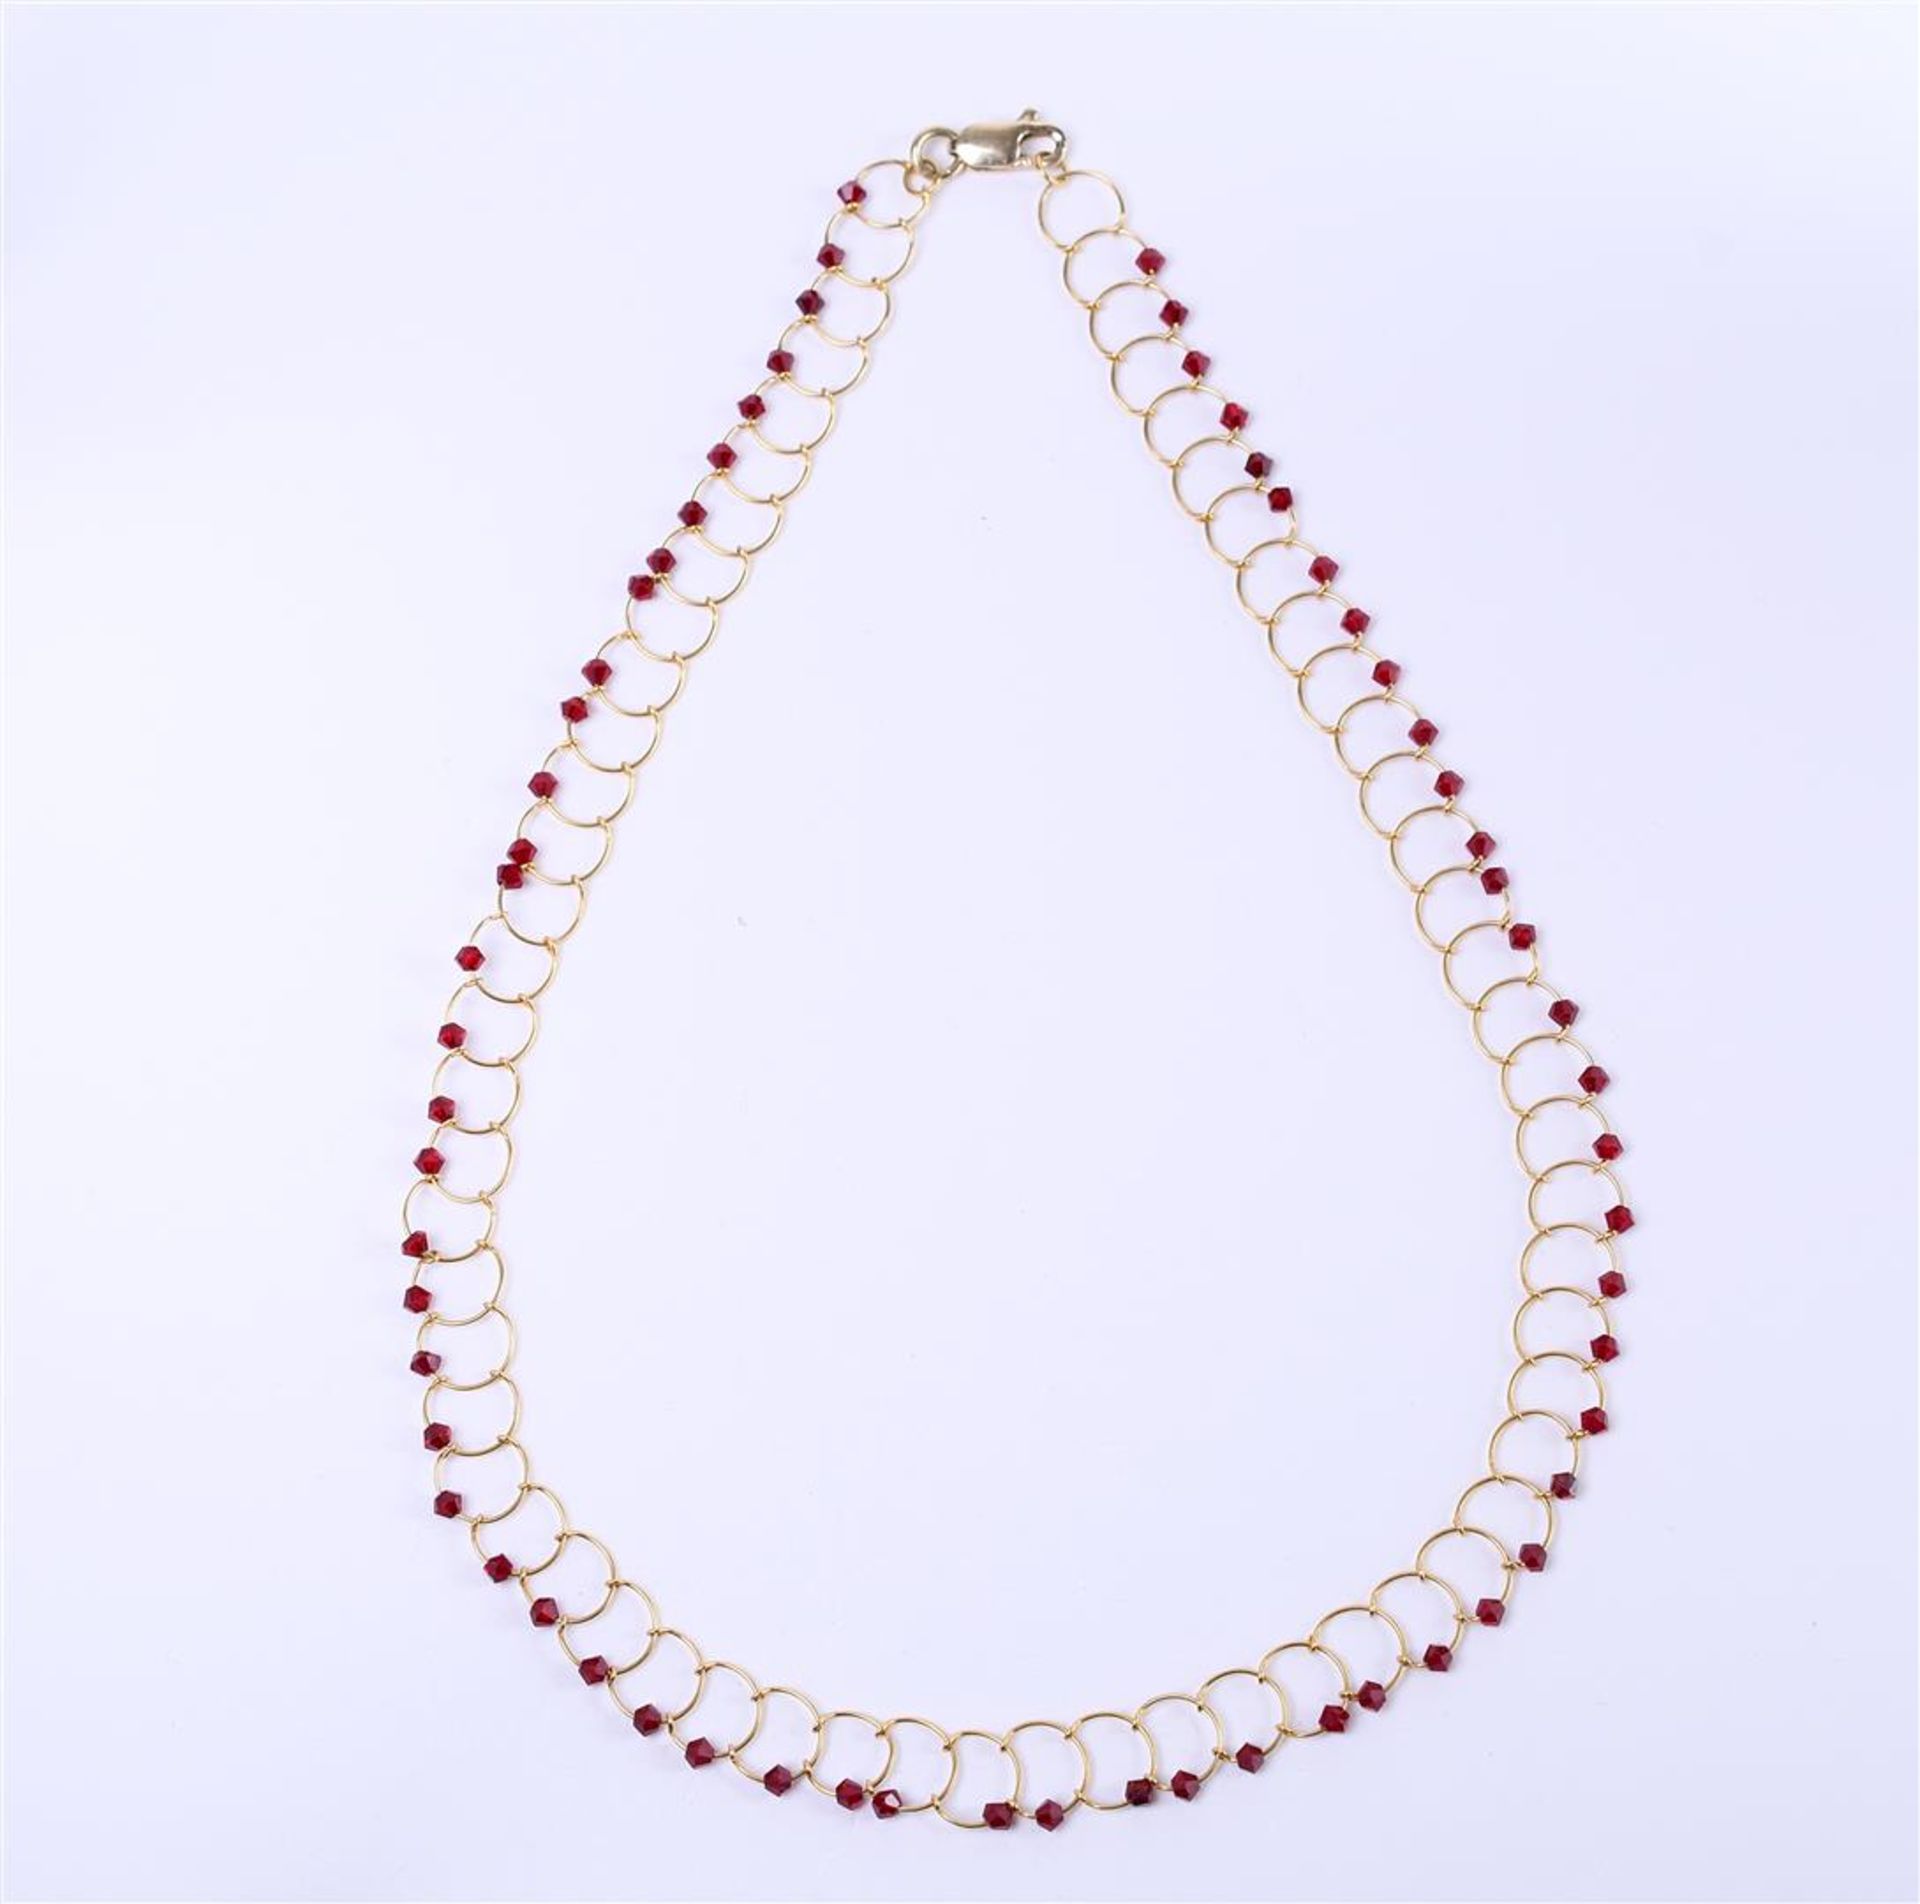 14 kt yellow gold wire necklace set with red crystal stones. Necklace length 41cm - Image 2 of 6